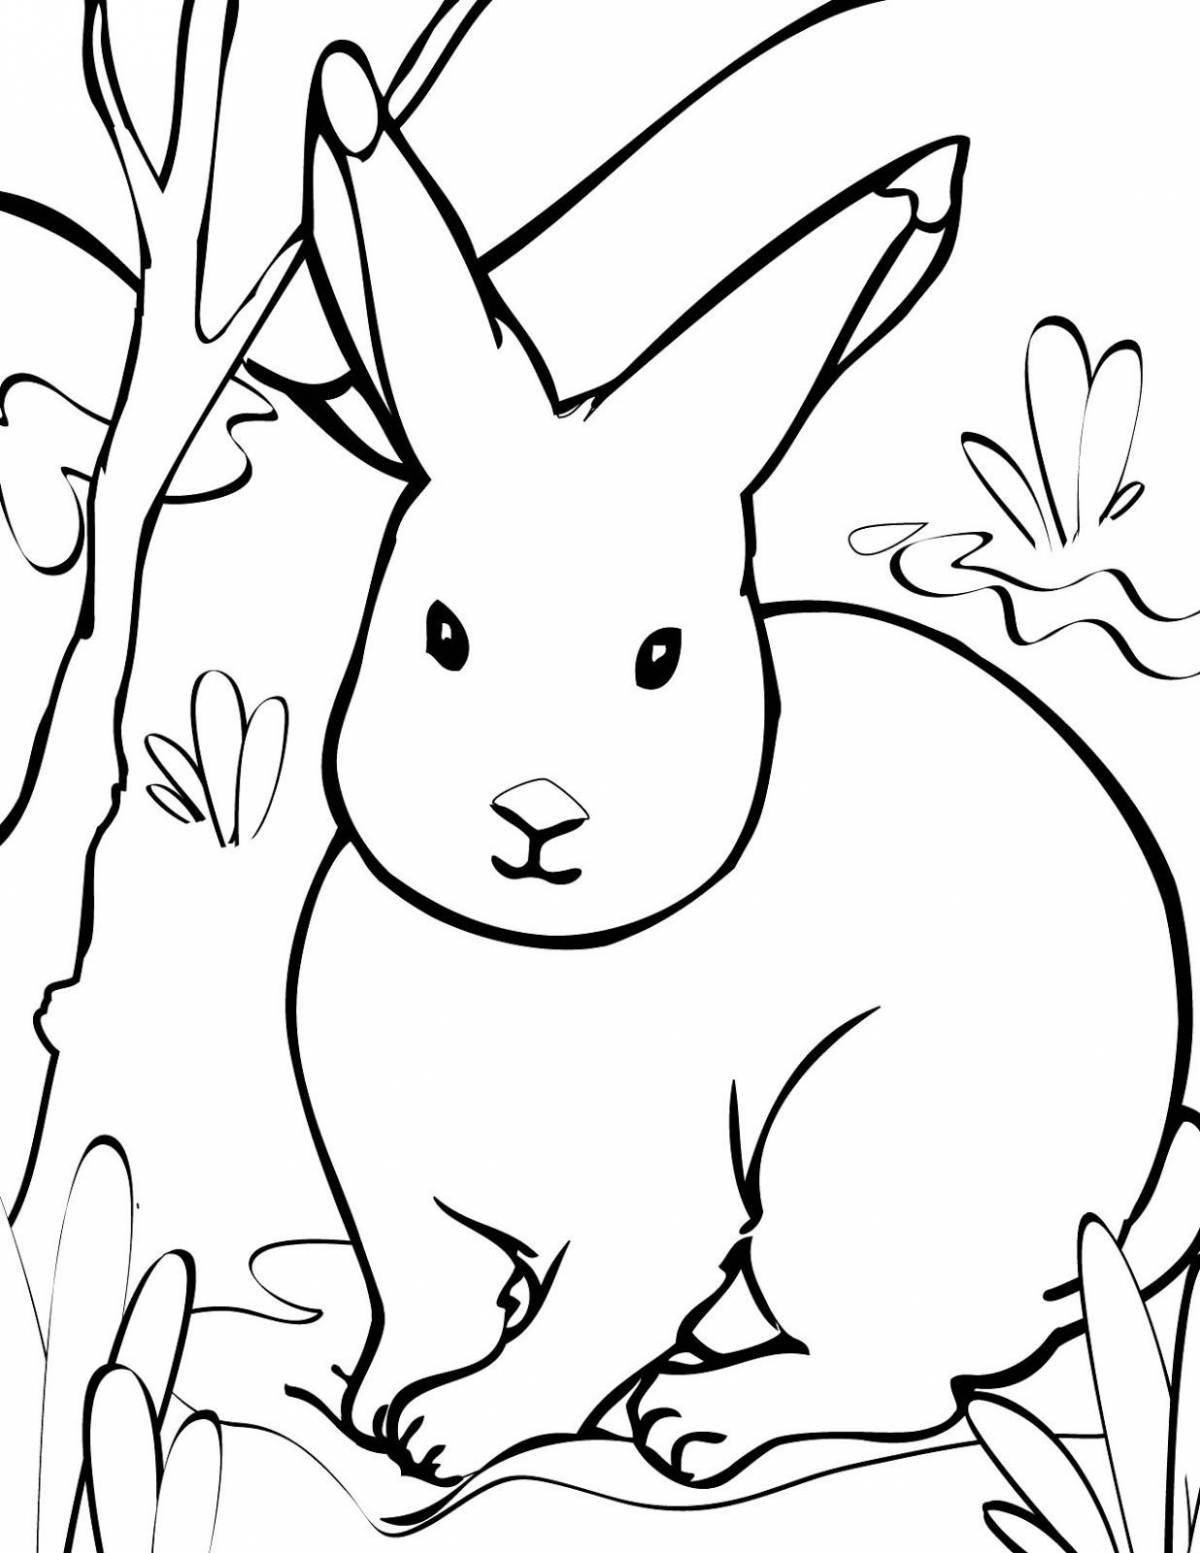 Adorable forest animals coloring book